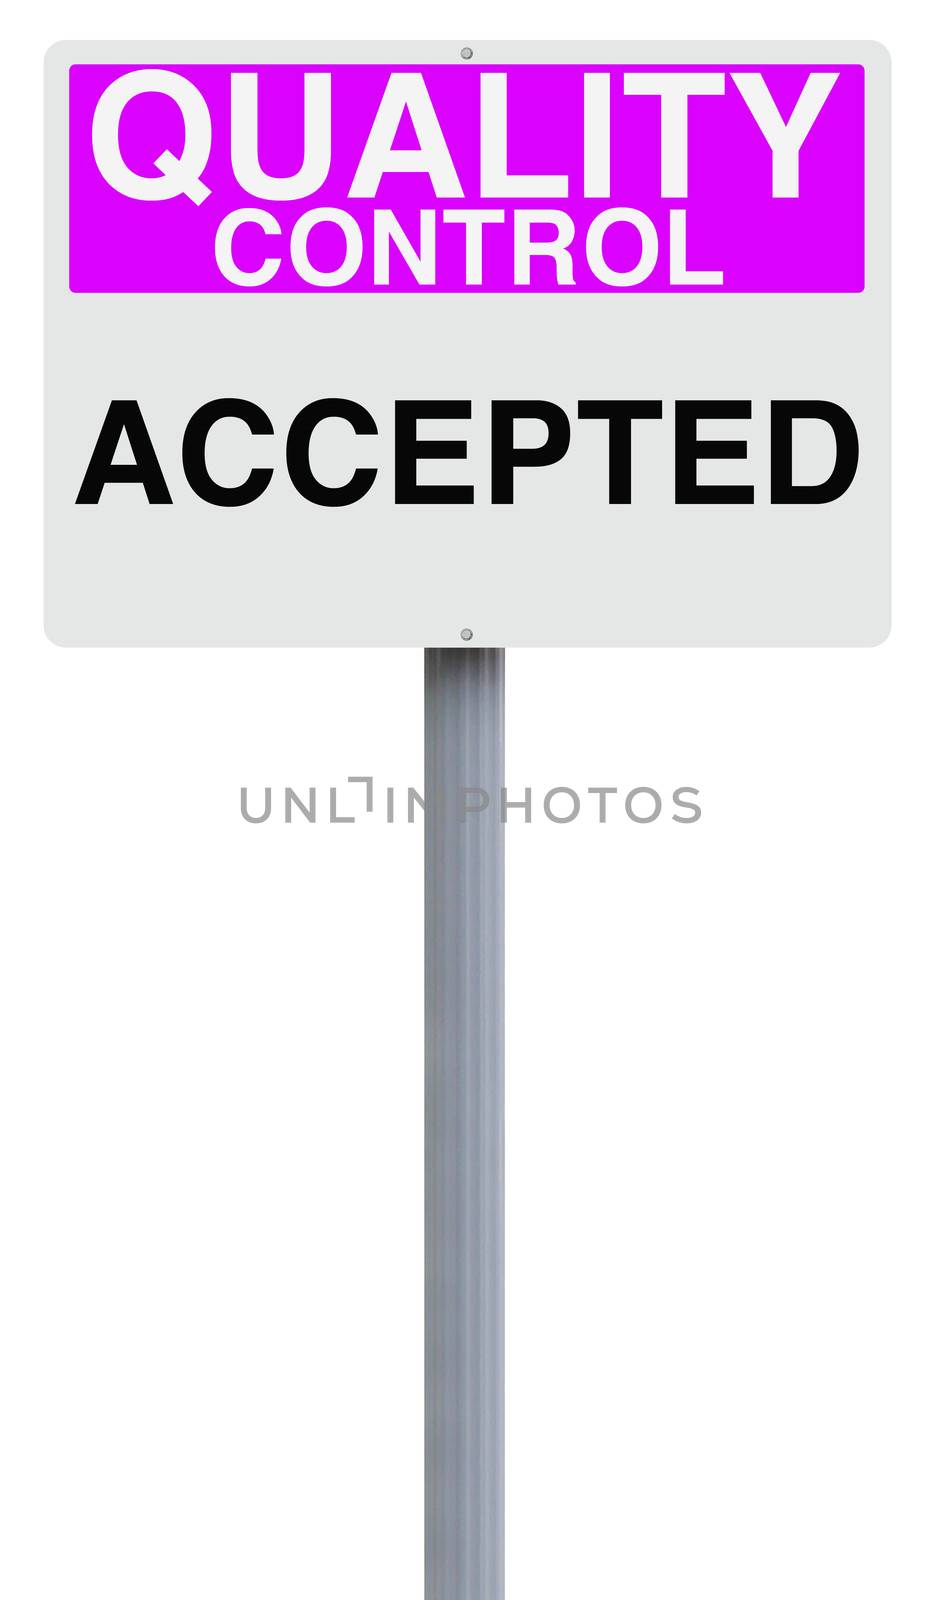 A quality control sign indicating Accepted